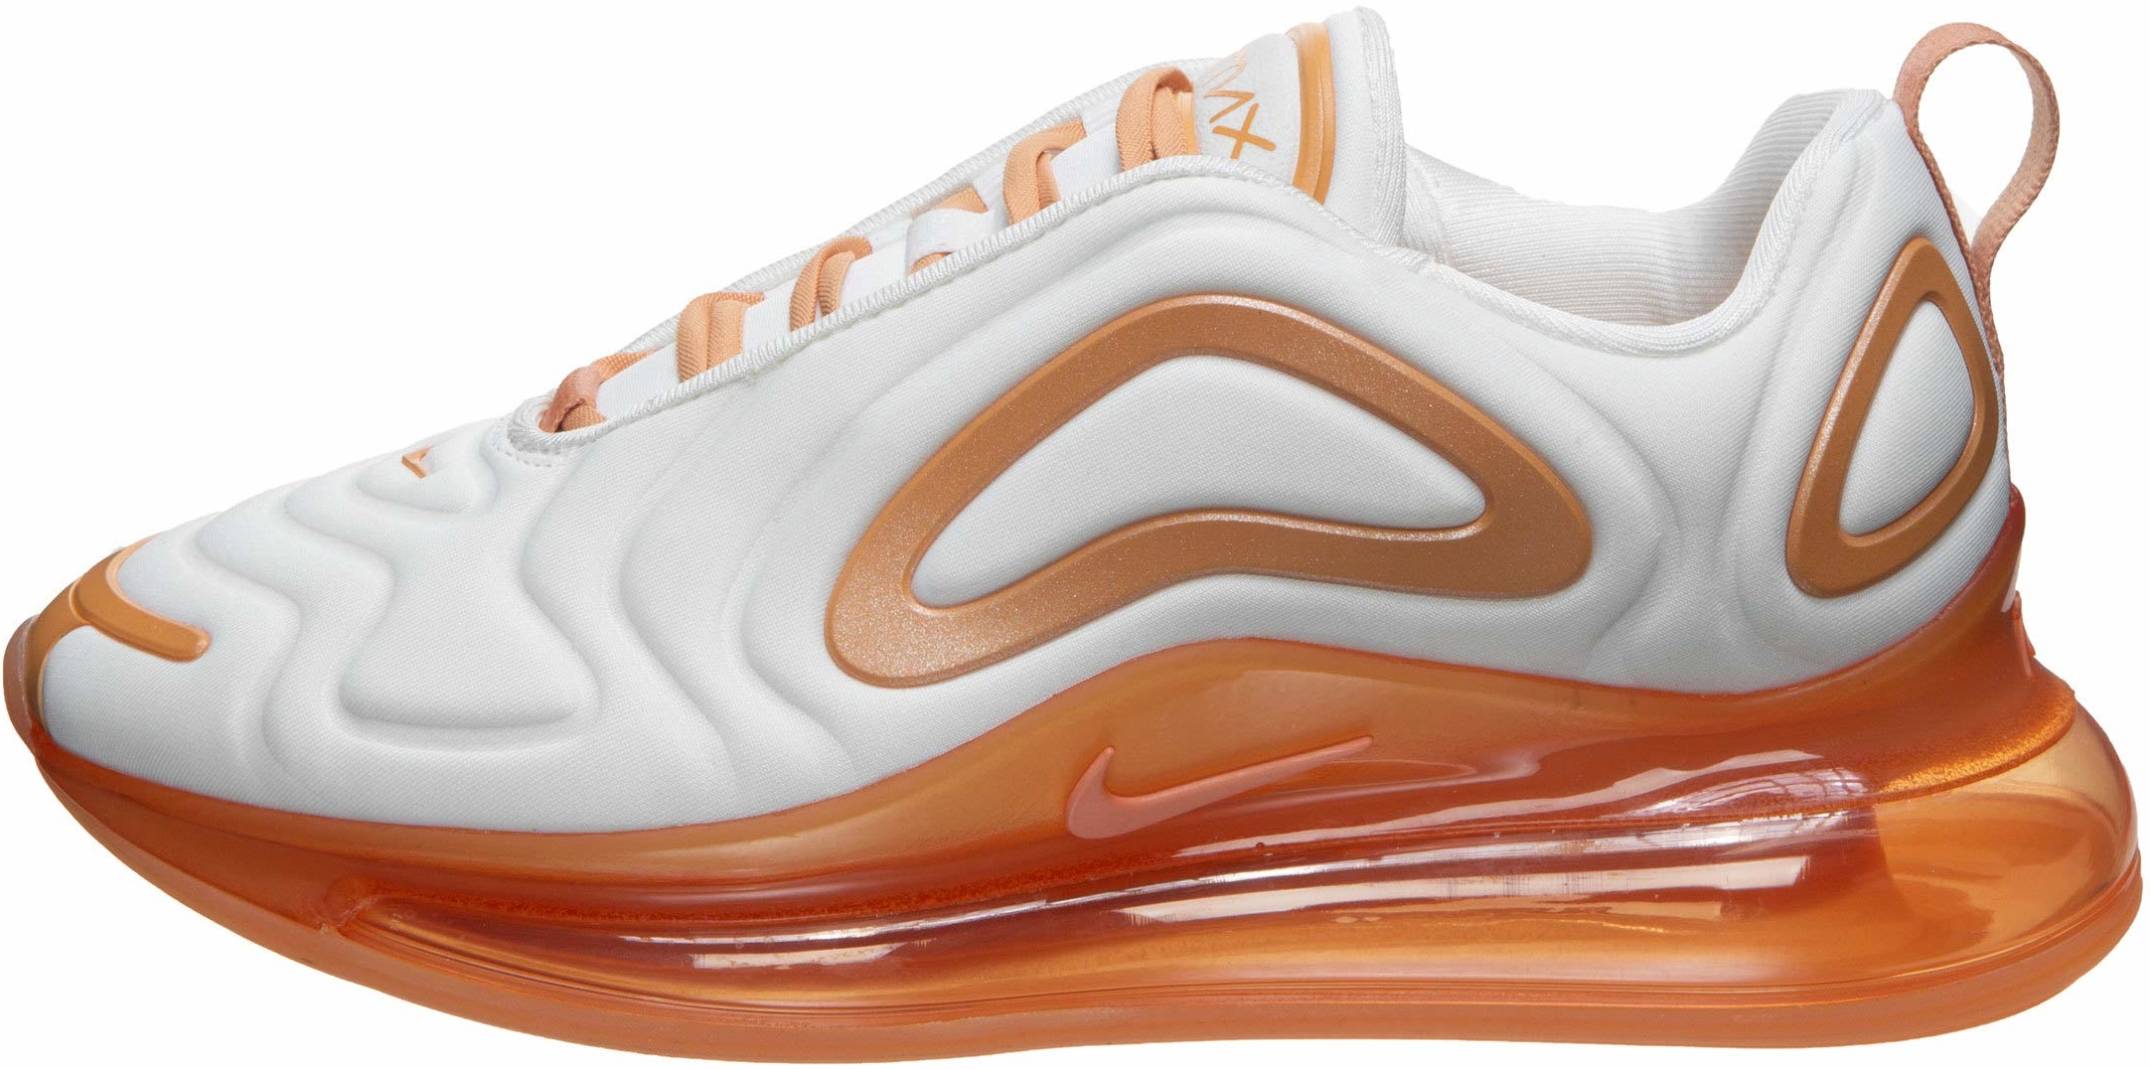 Nike Air Max 720 SE sneakers (only $180 